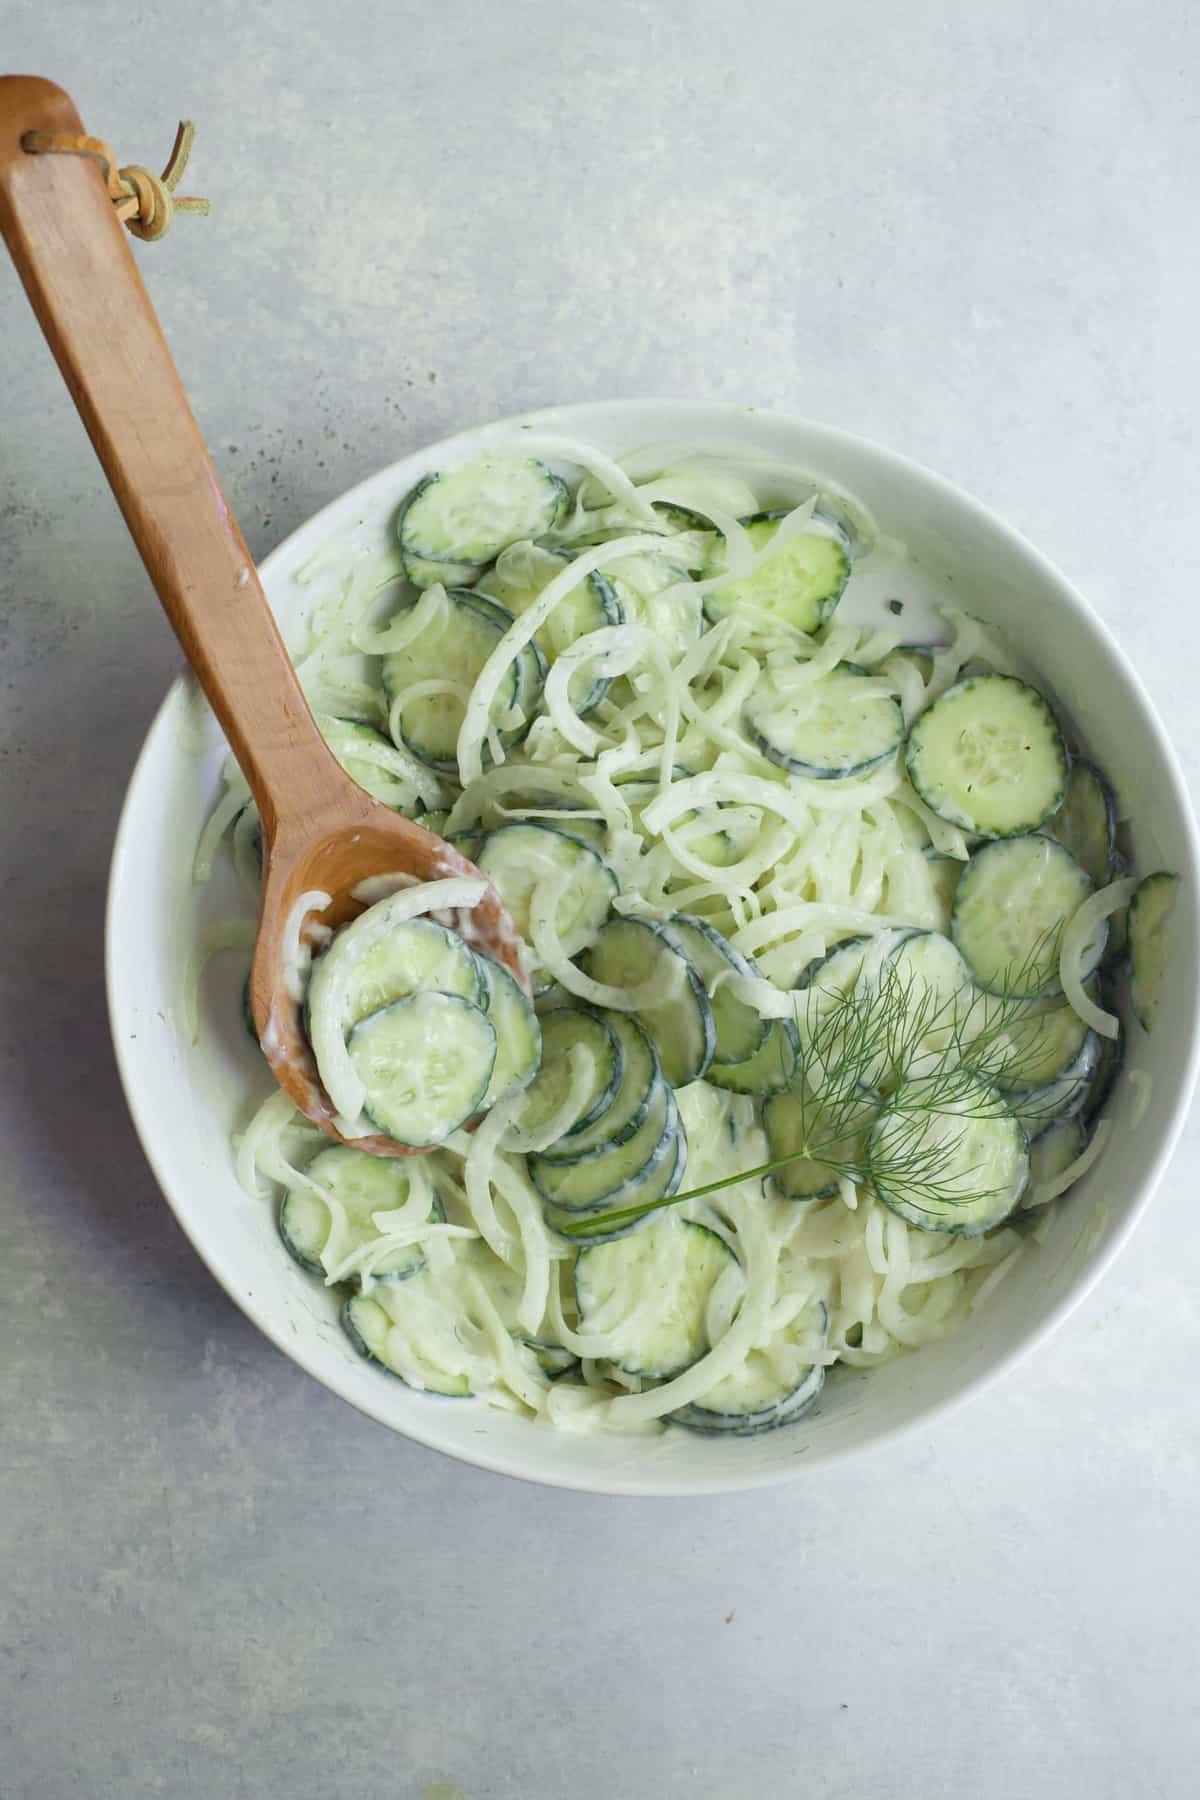 How to Make an Easy Cucumber Onion Salad